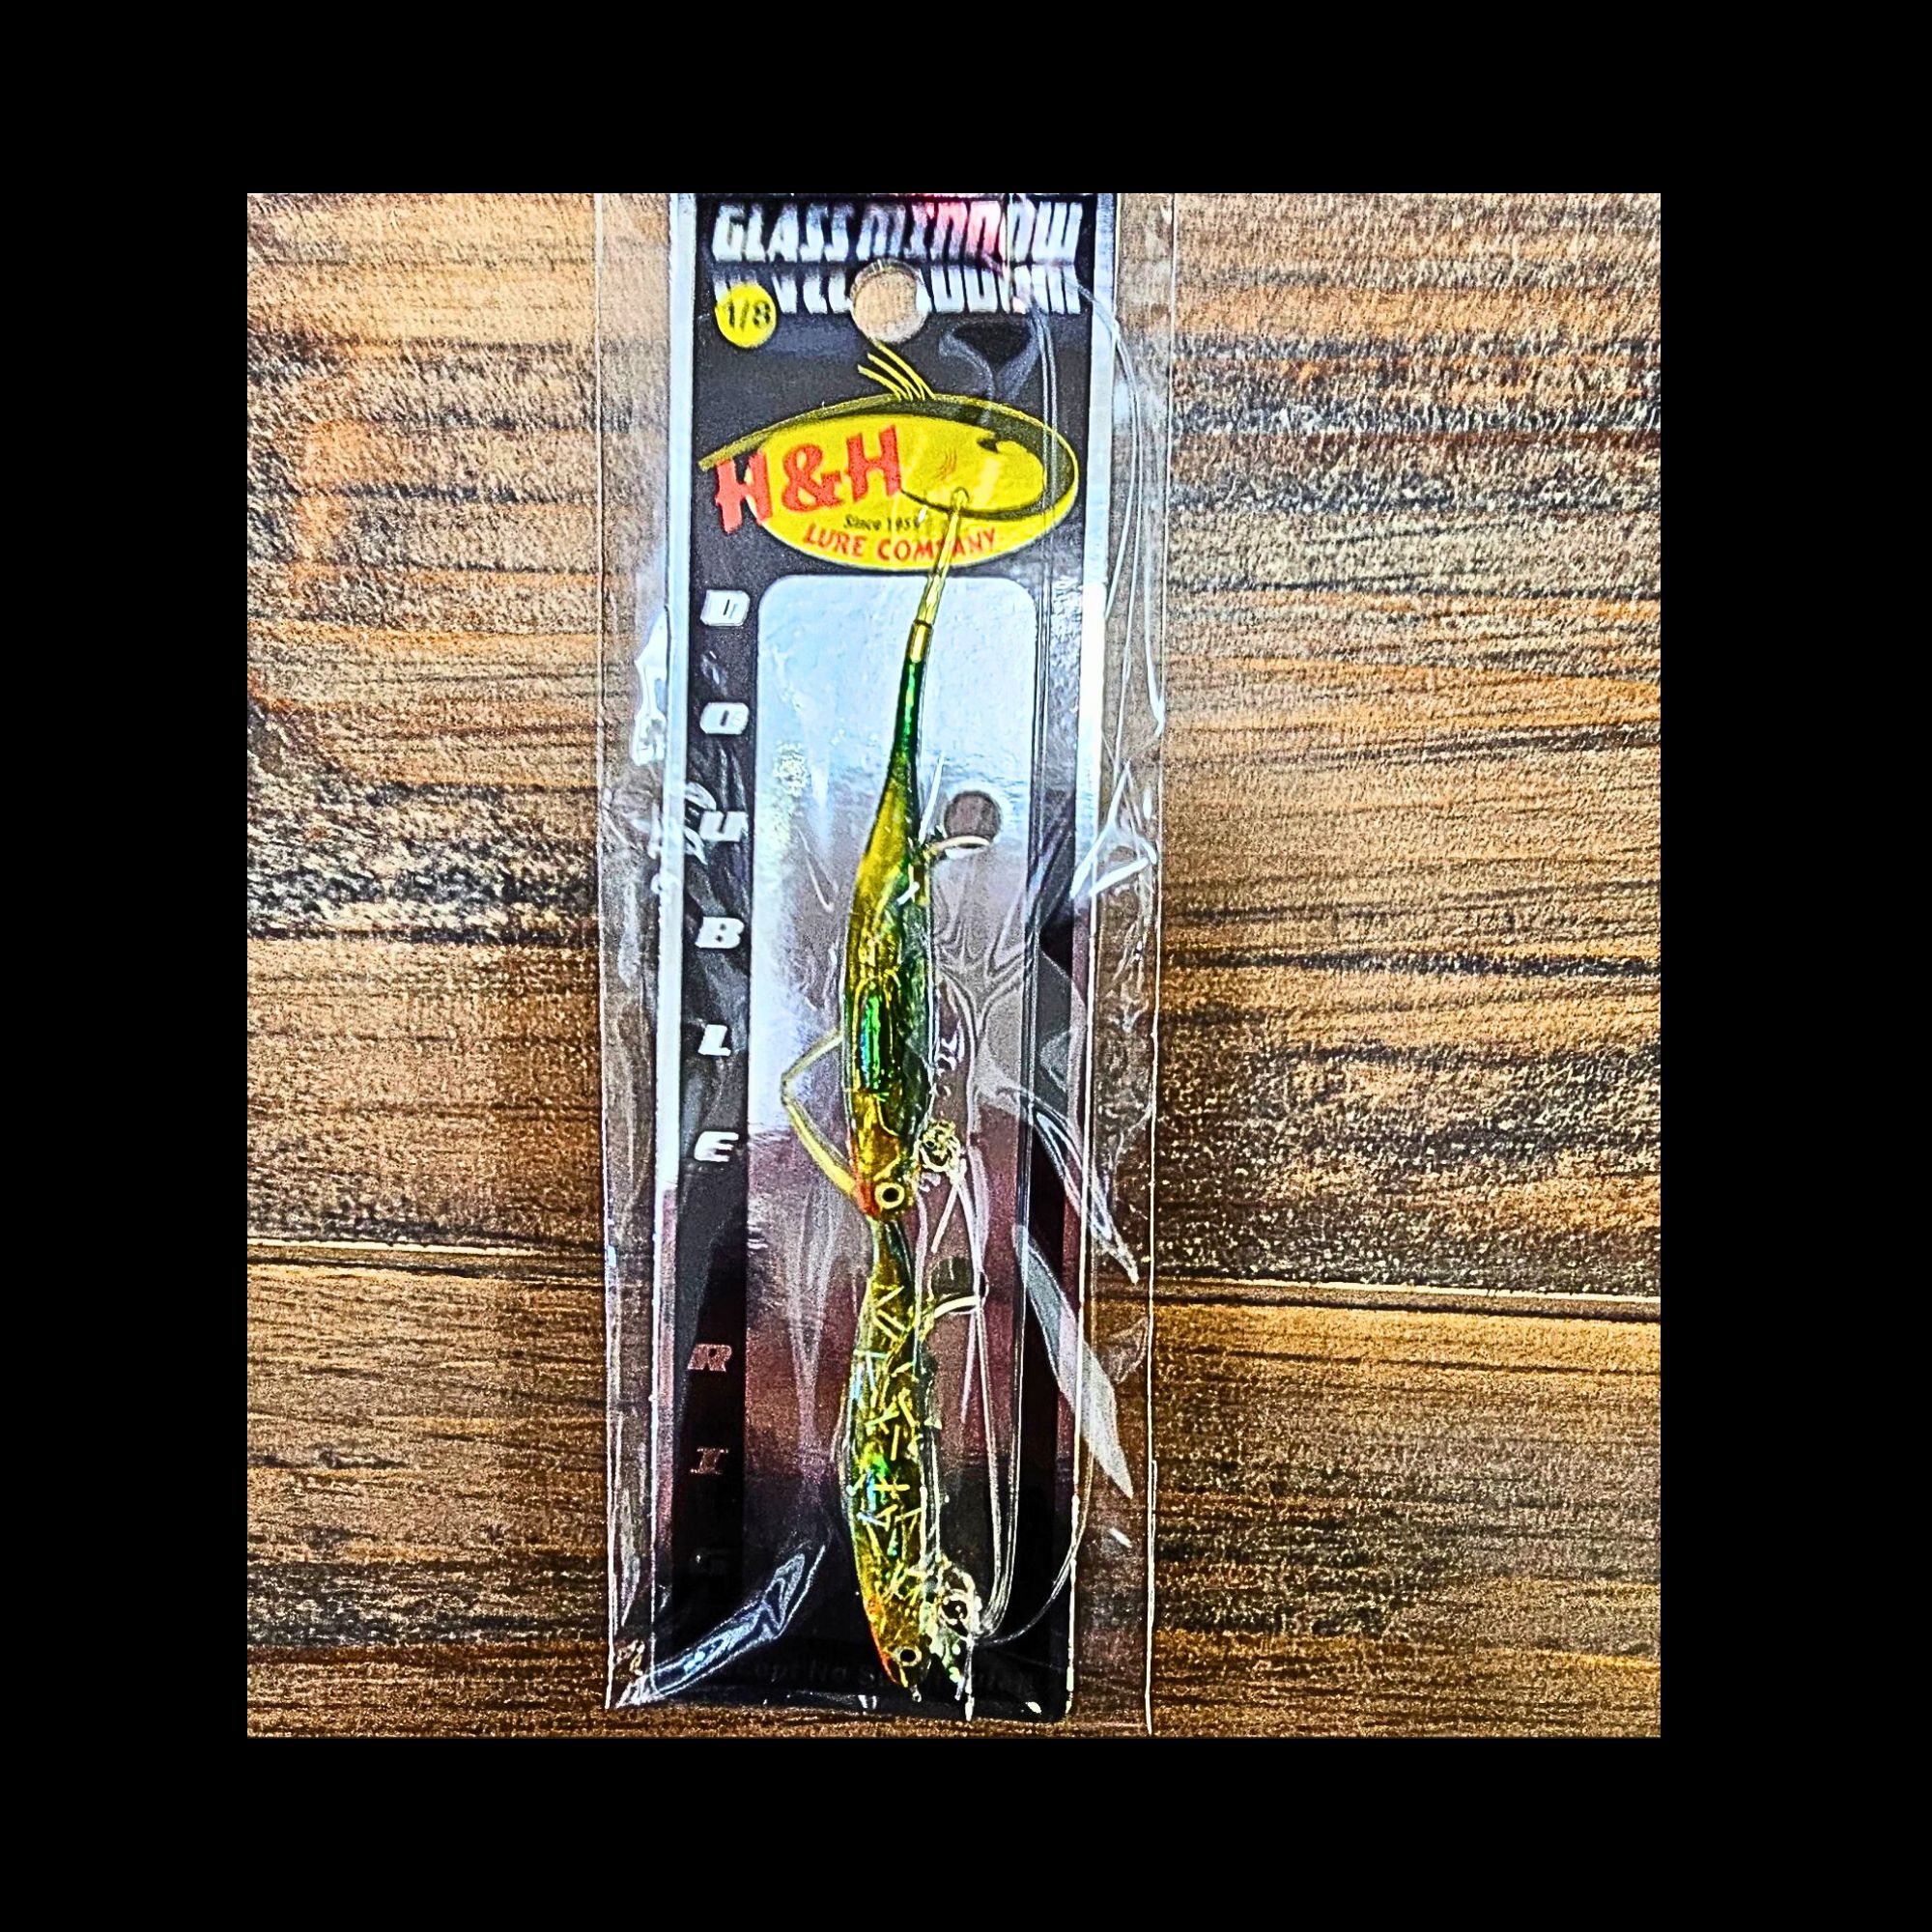 Glass Minnow Double Rig Fishing Lure, 1/4 oz, H&H Lure Co., Store